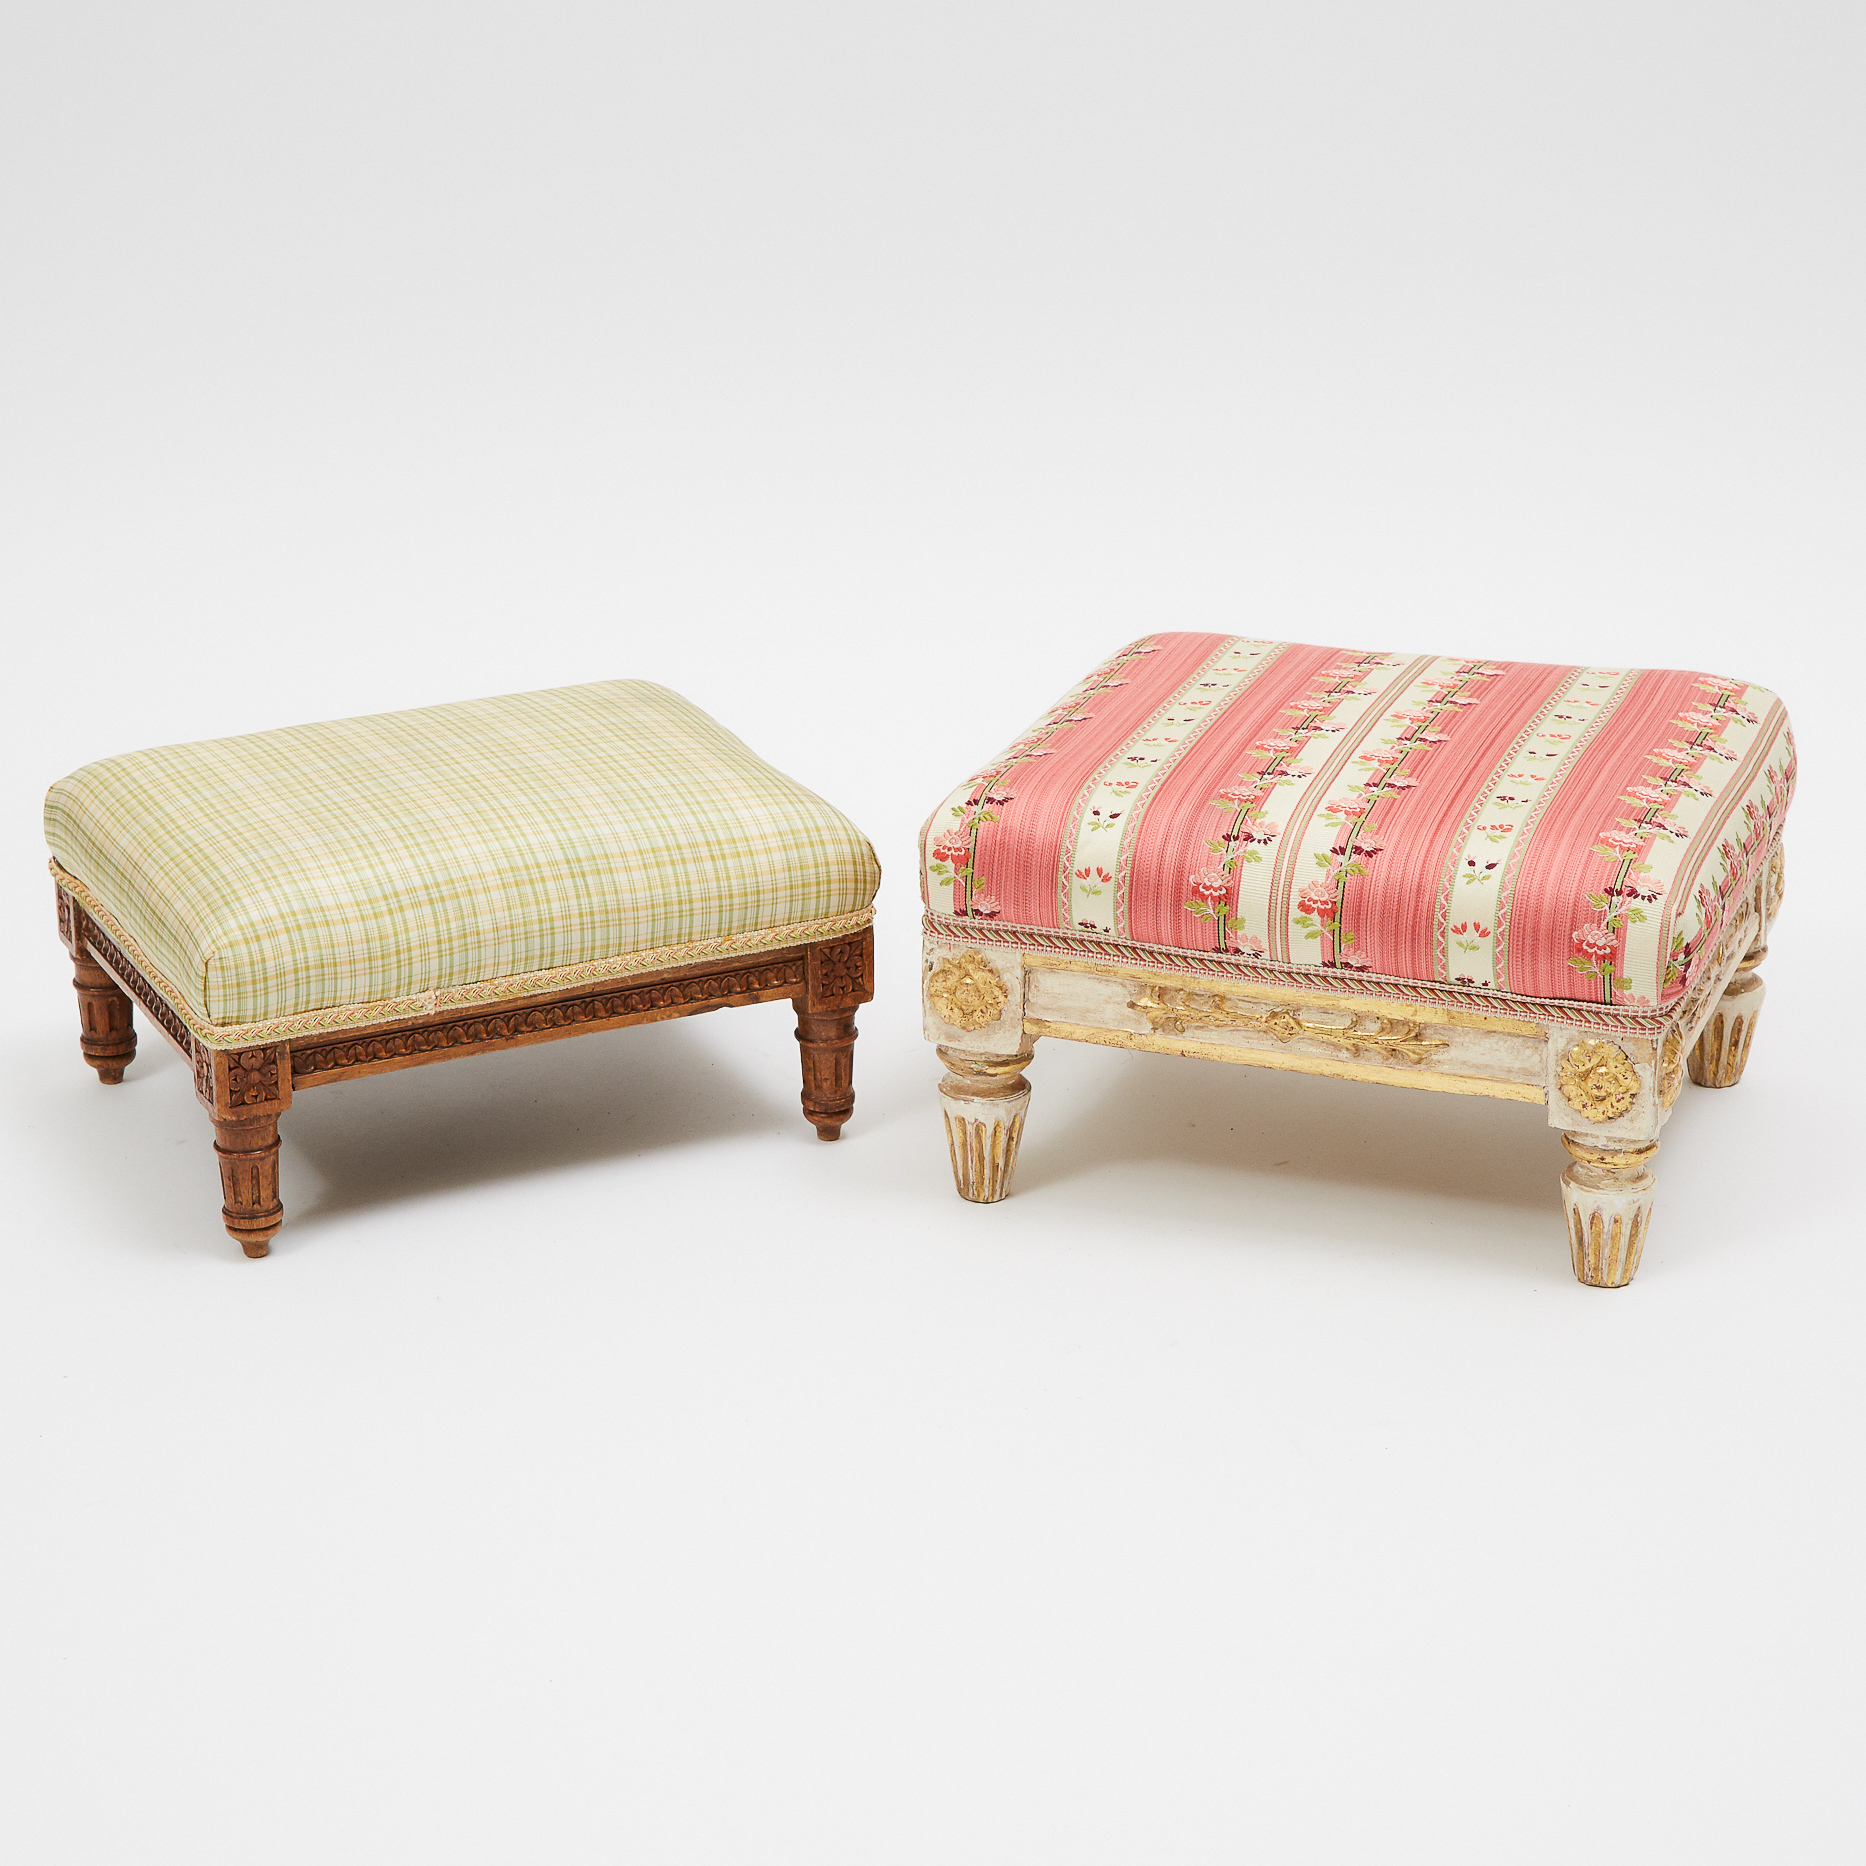 Two Small French Provincial Foot Stools, 19th/early 20th century